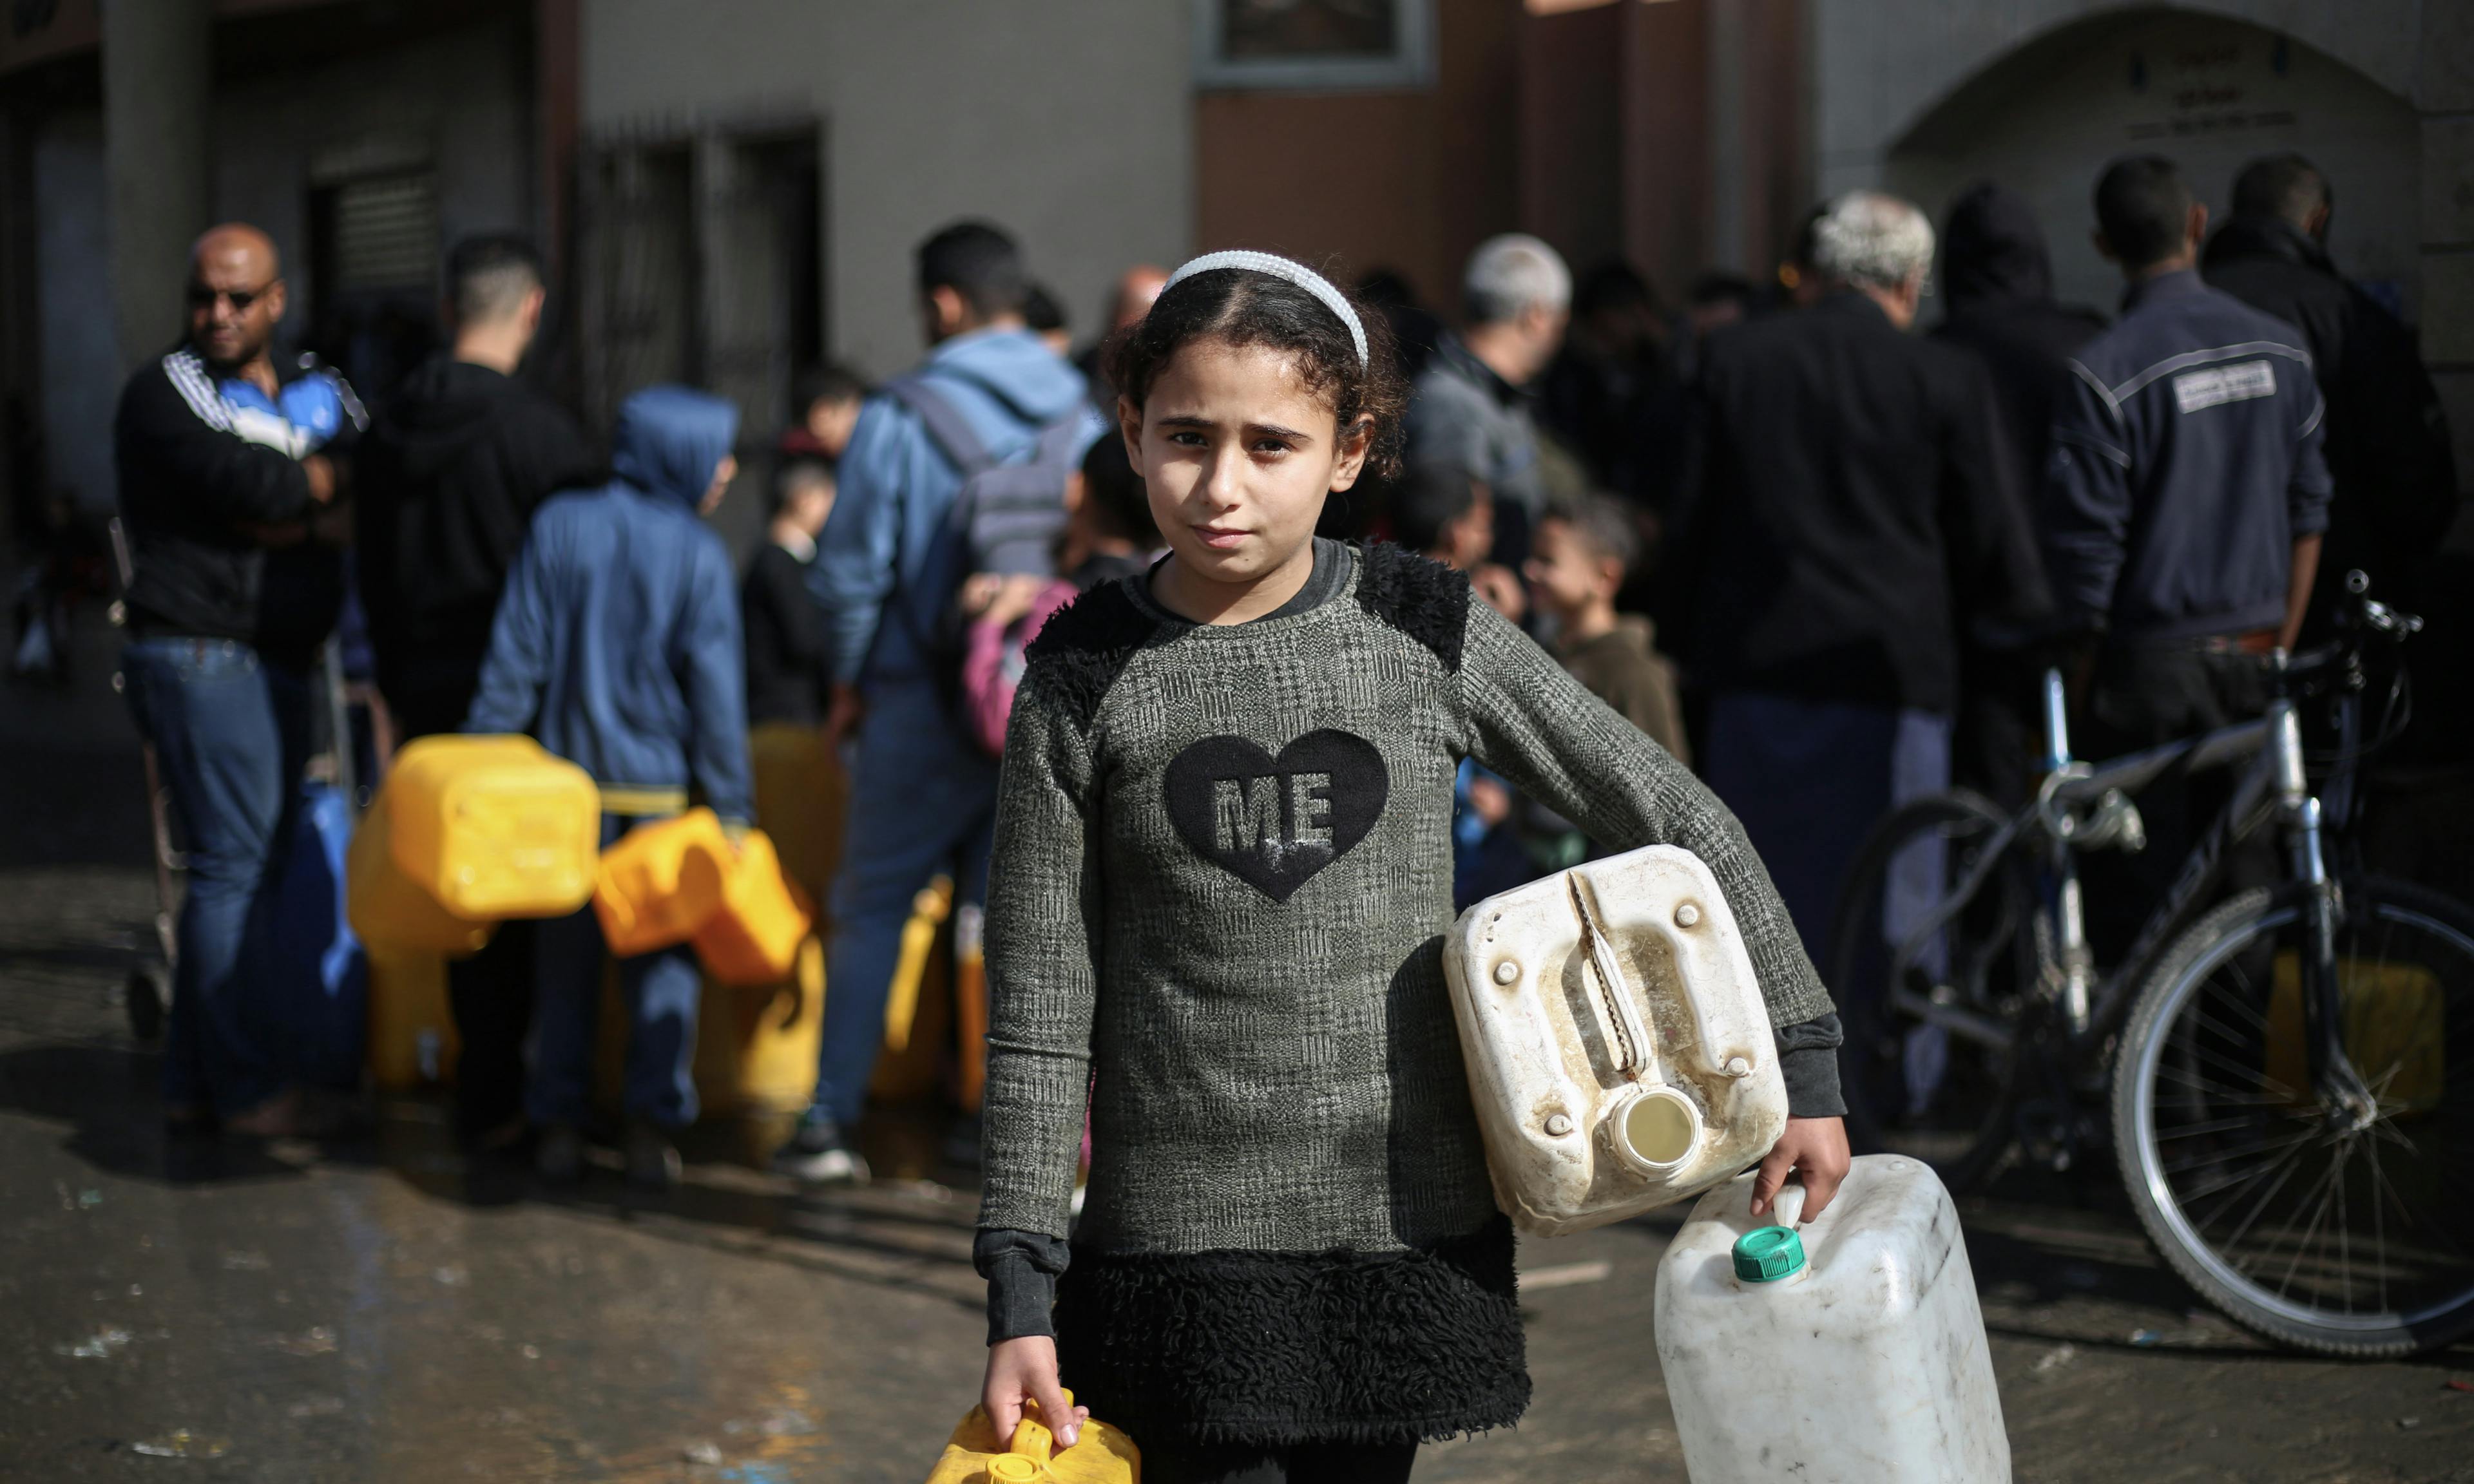 11-year-old Taline, was forced to leave her home in Khan Younis due to the hostilities. Every day she stands in a line to collect water for her family.